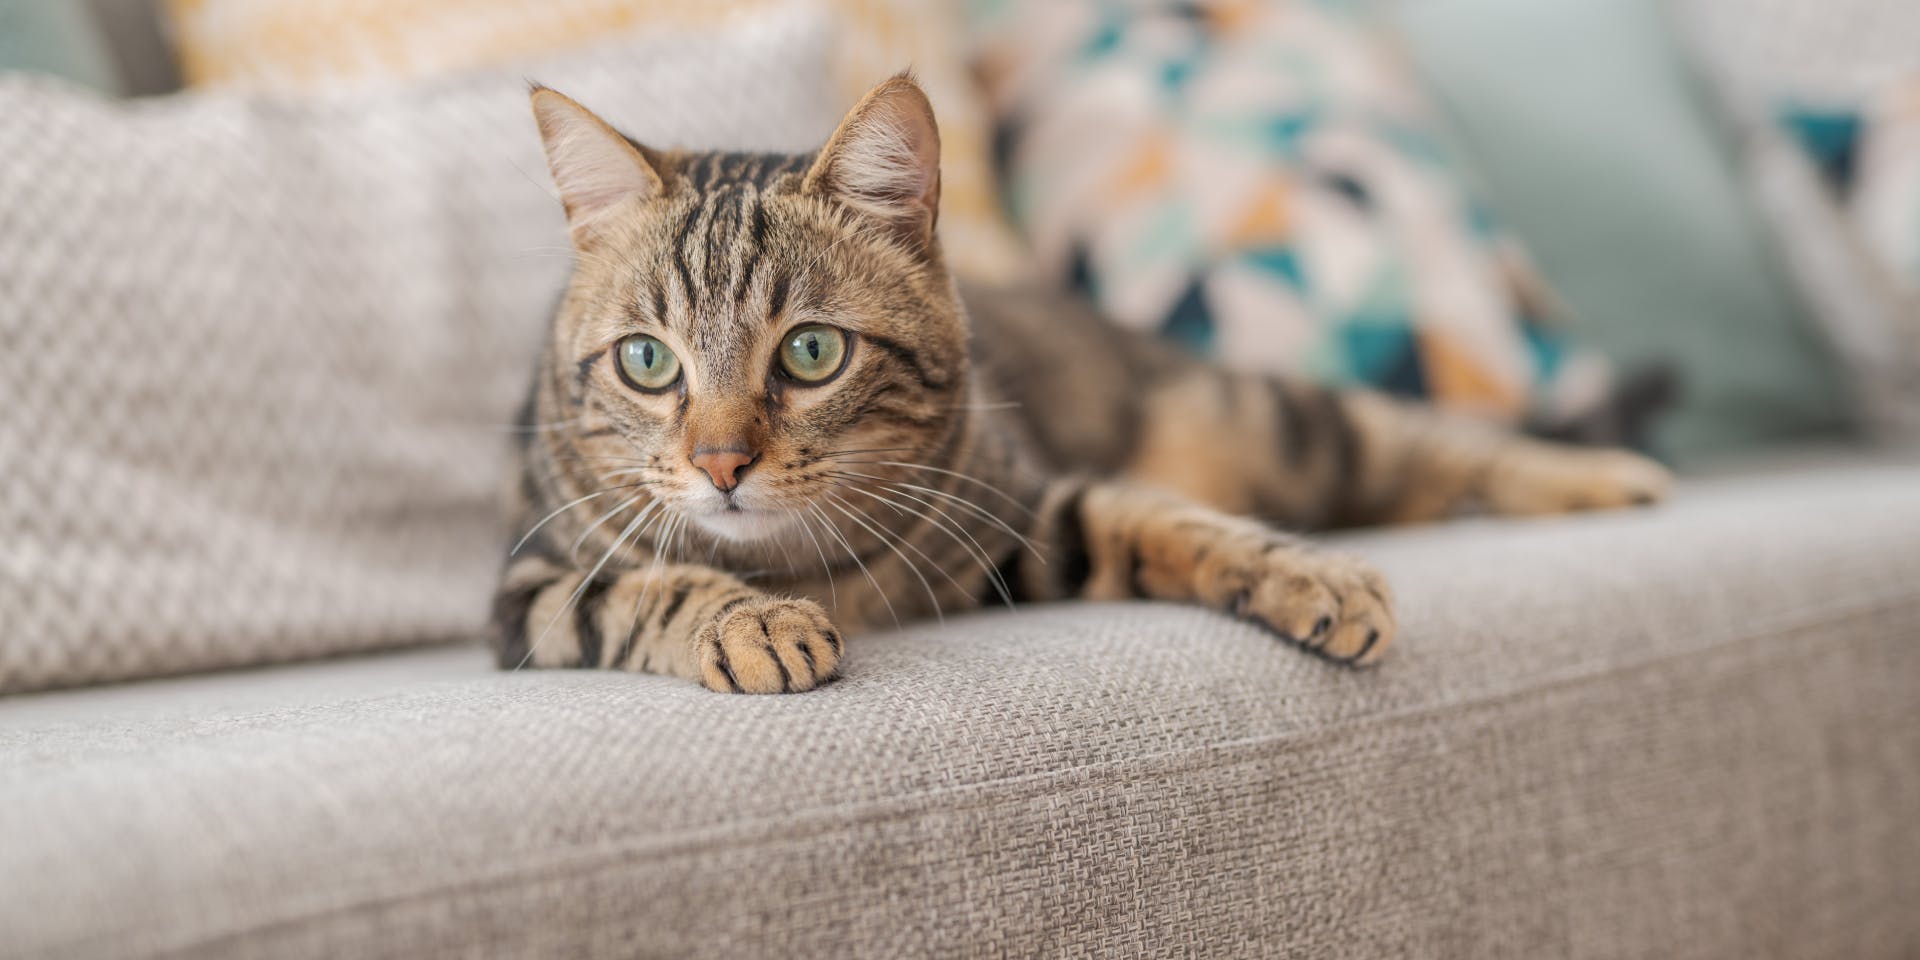 A tabby cat sitting on a beige couch.